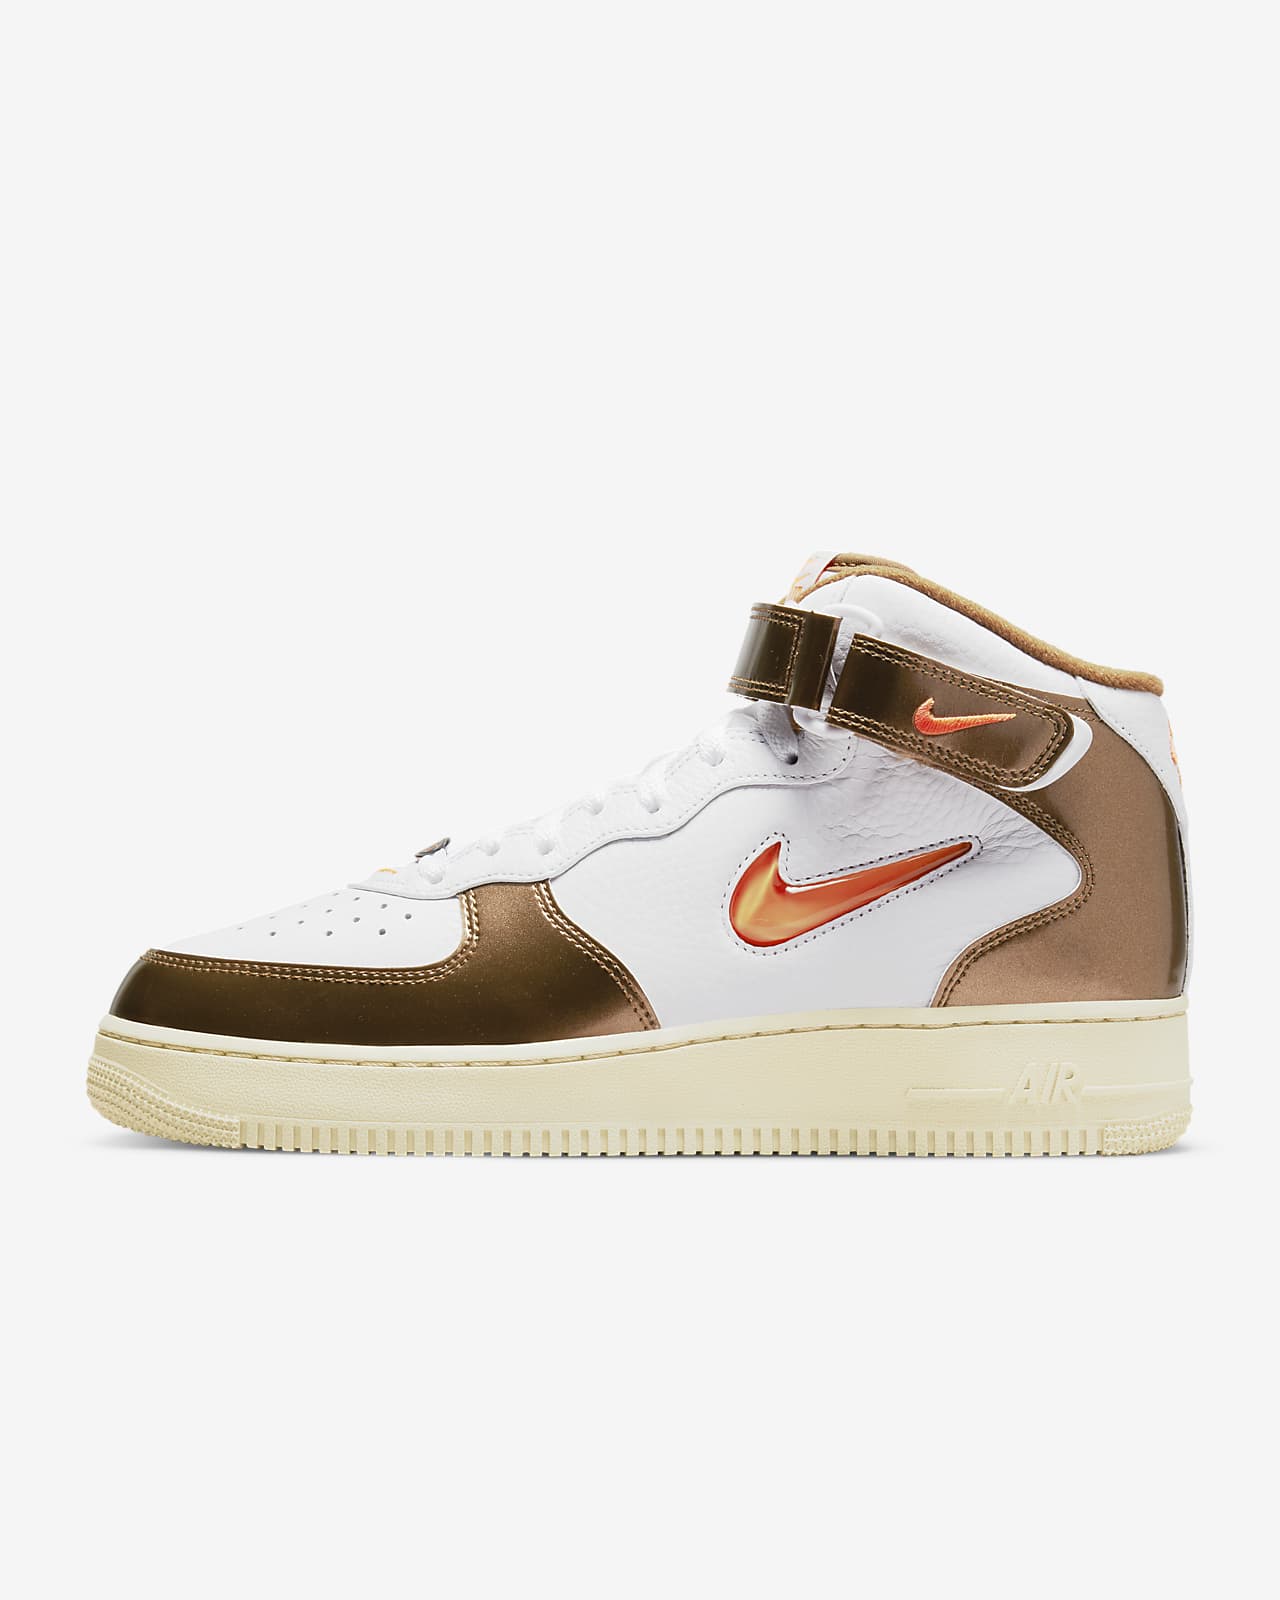 Welsprekend zuiden Toevoeging Chaussure Nike Air Force 1 Mid QS pour Homme. Nike FR